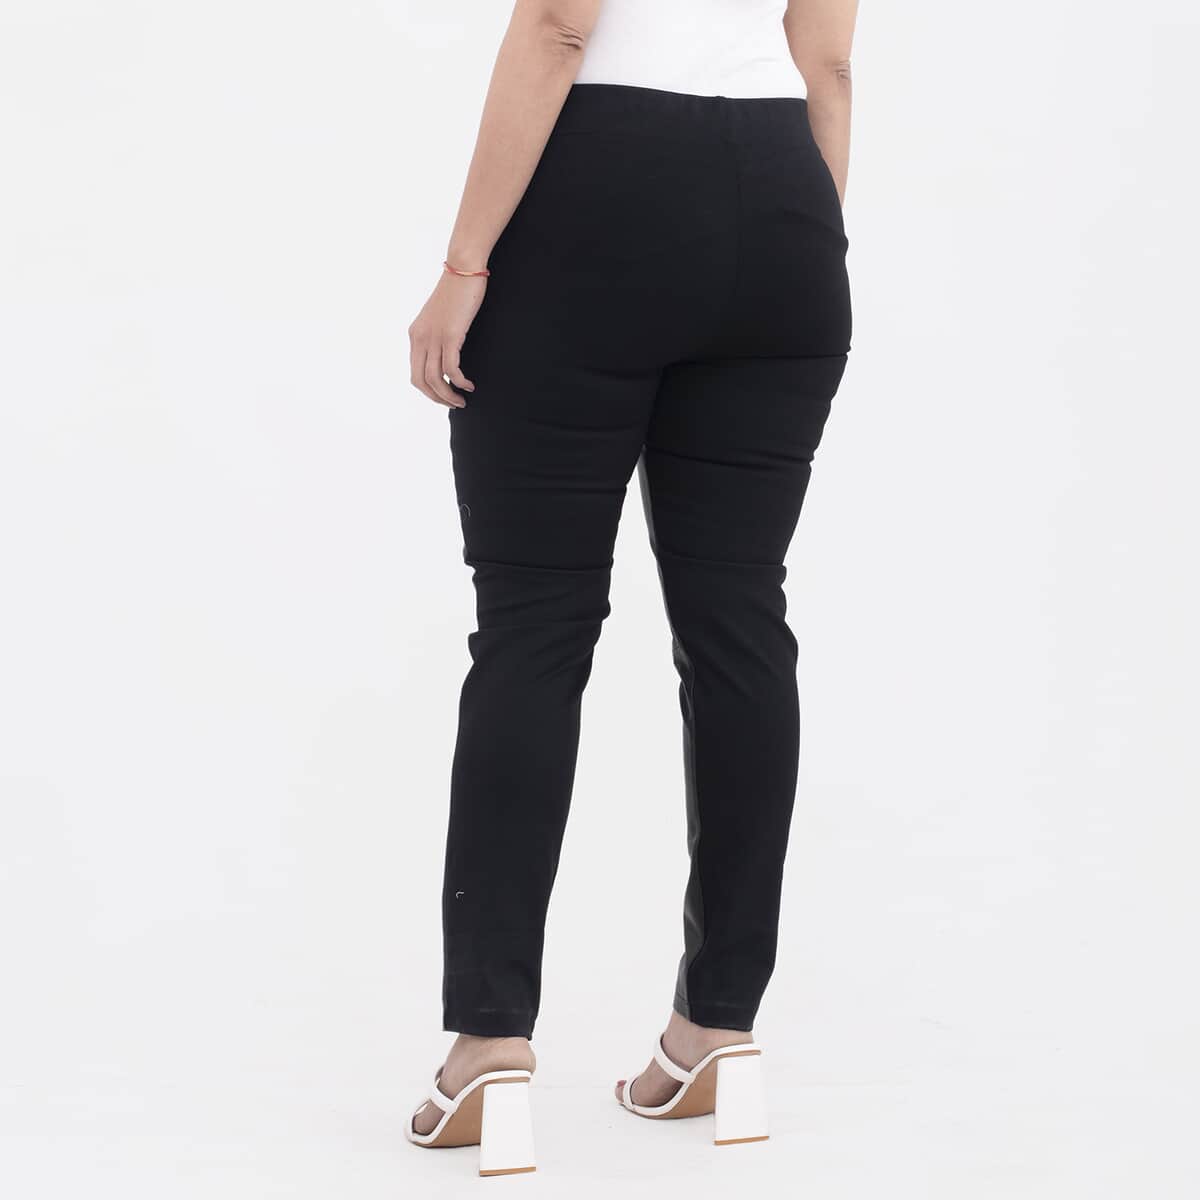 Tamsy Black Genuine Lamb Leather With Back Ponte Knit Legging - 3X image number 1